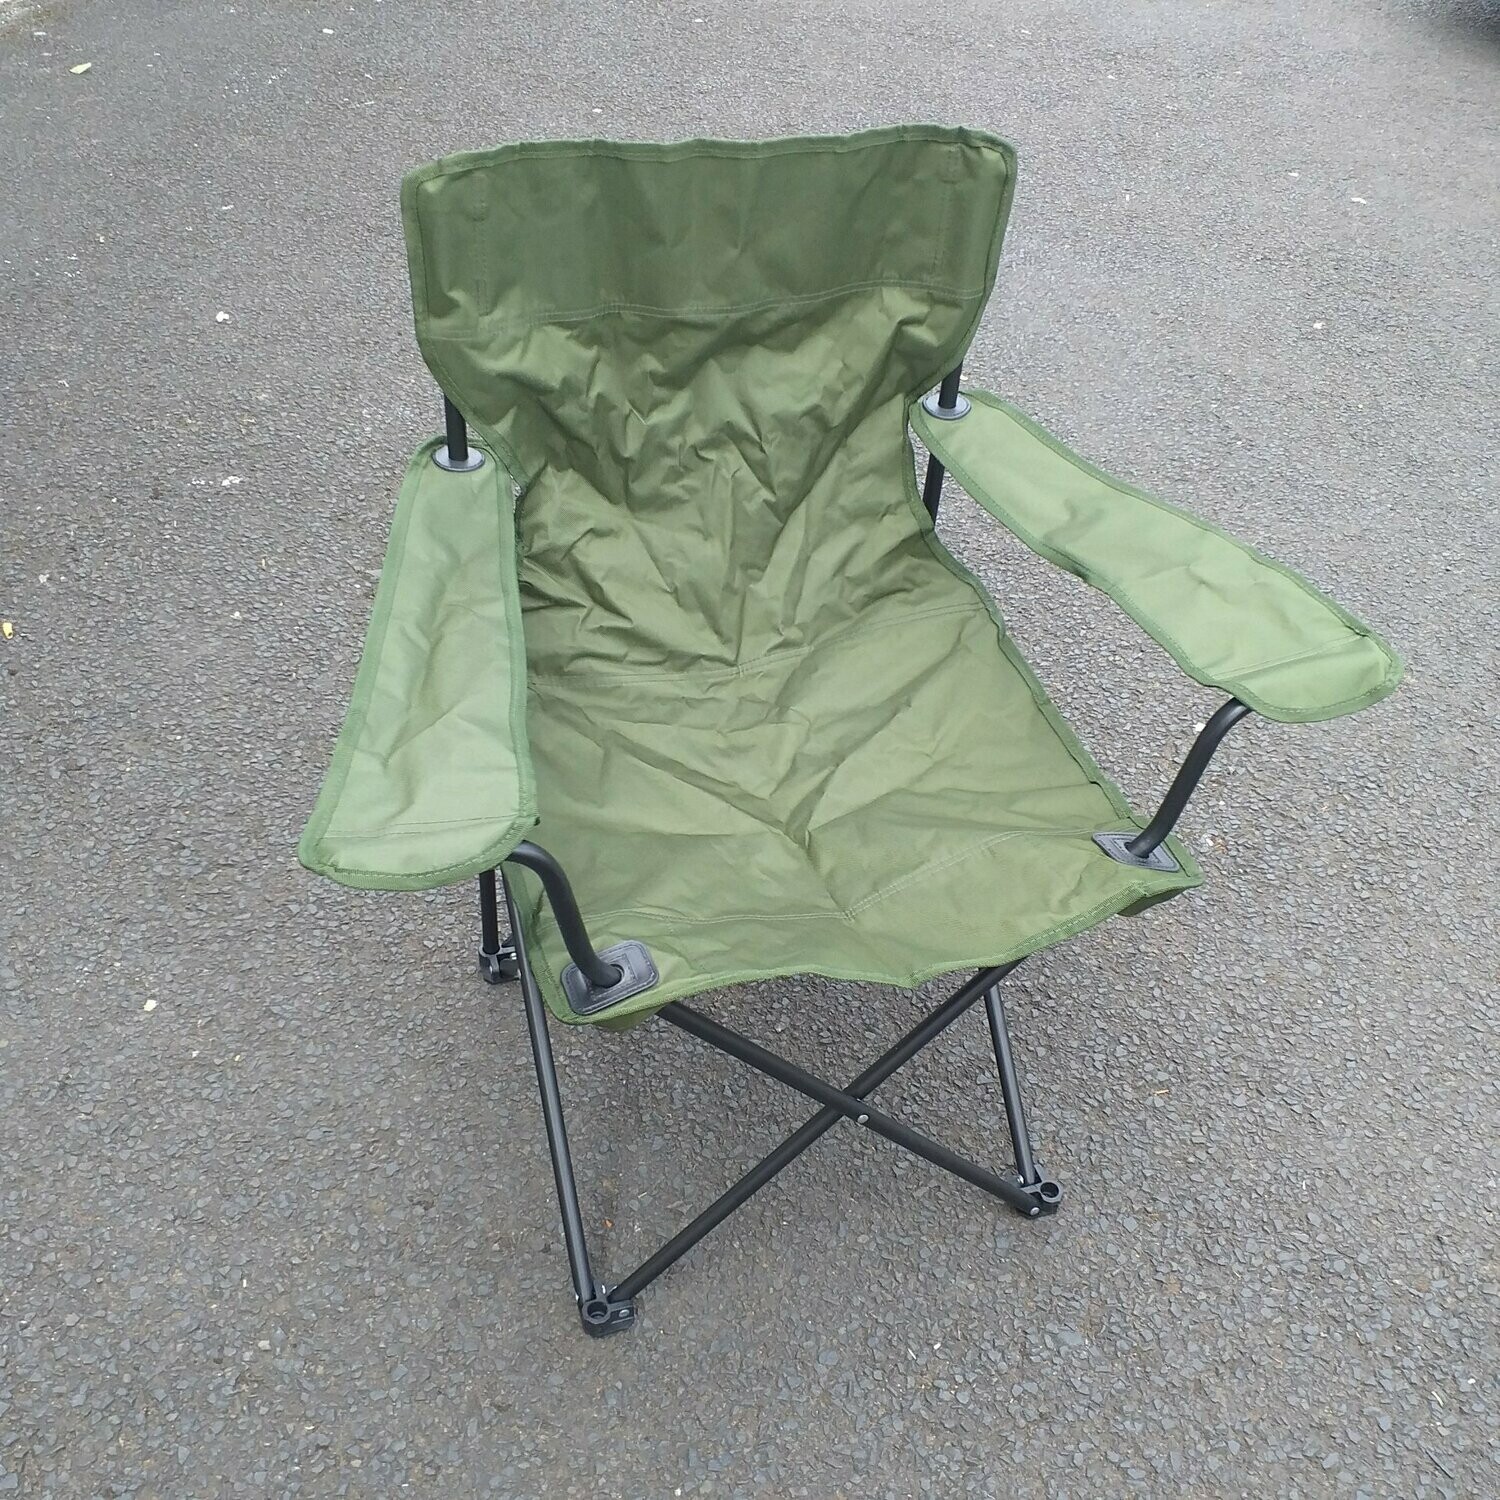 British Army Issue Folding Chair (Arm Rests)​